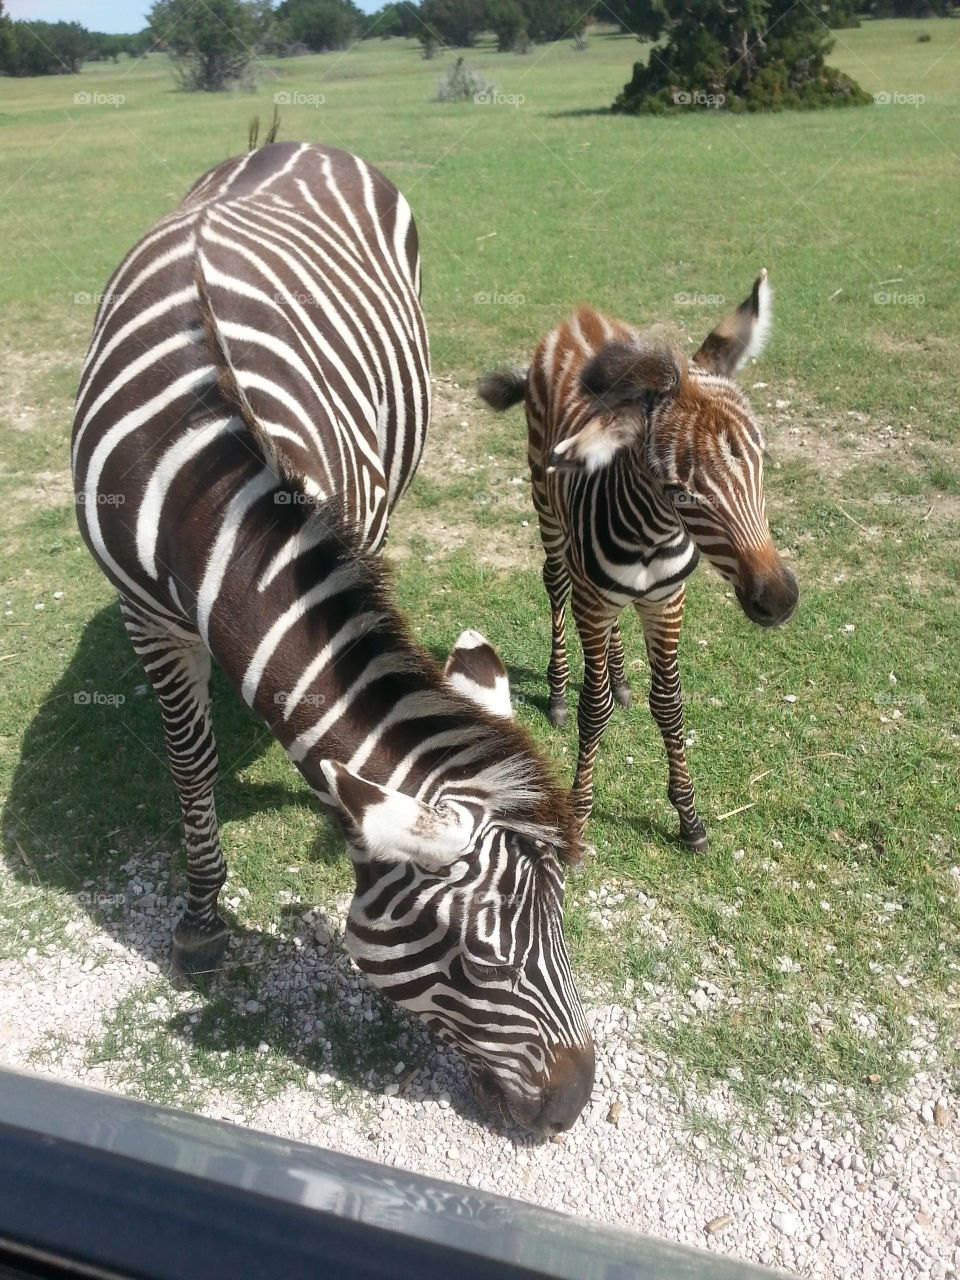 zebras. More animals from the Topsey zoo. beautiful zebra mother and baby!